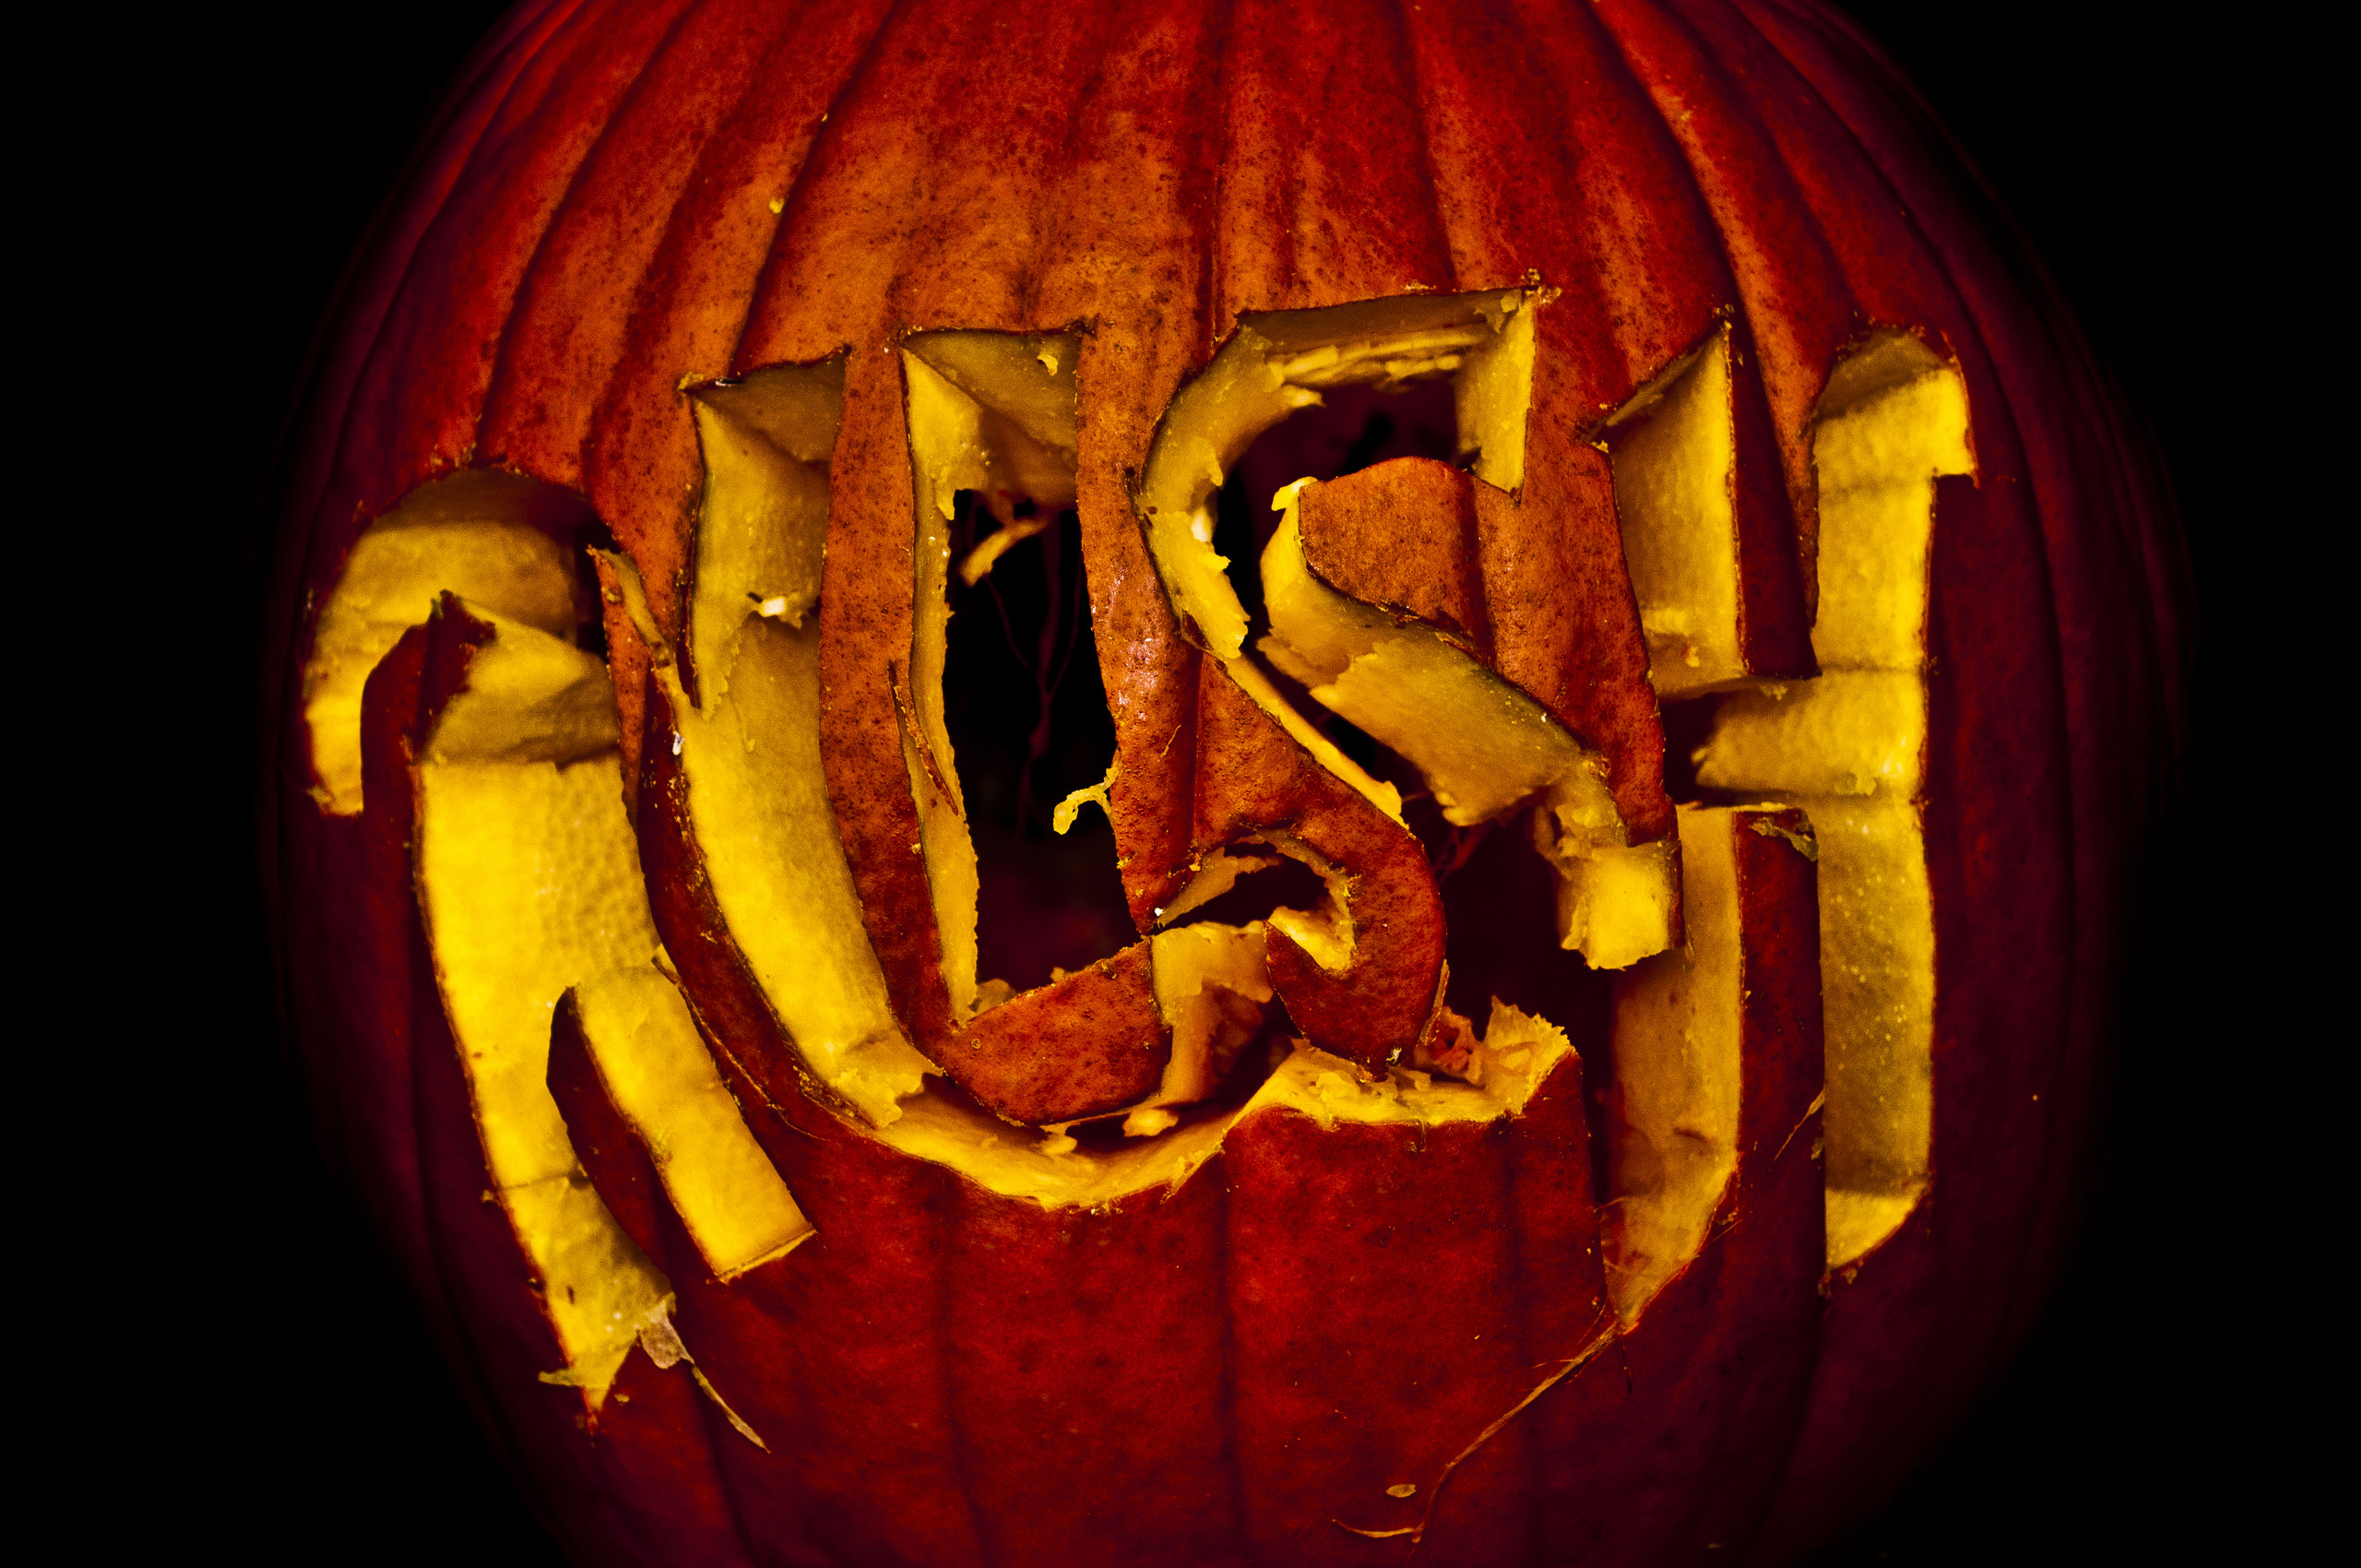 2560x1700 Rush images Rush Pumpkin HD wallpaper and background photos